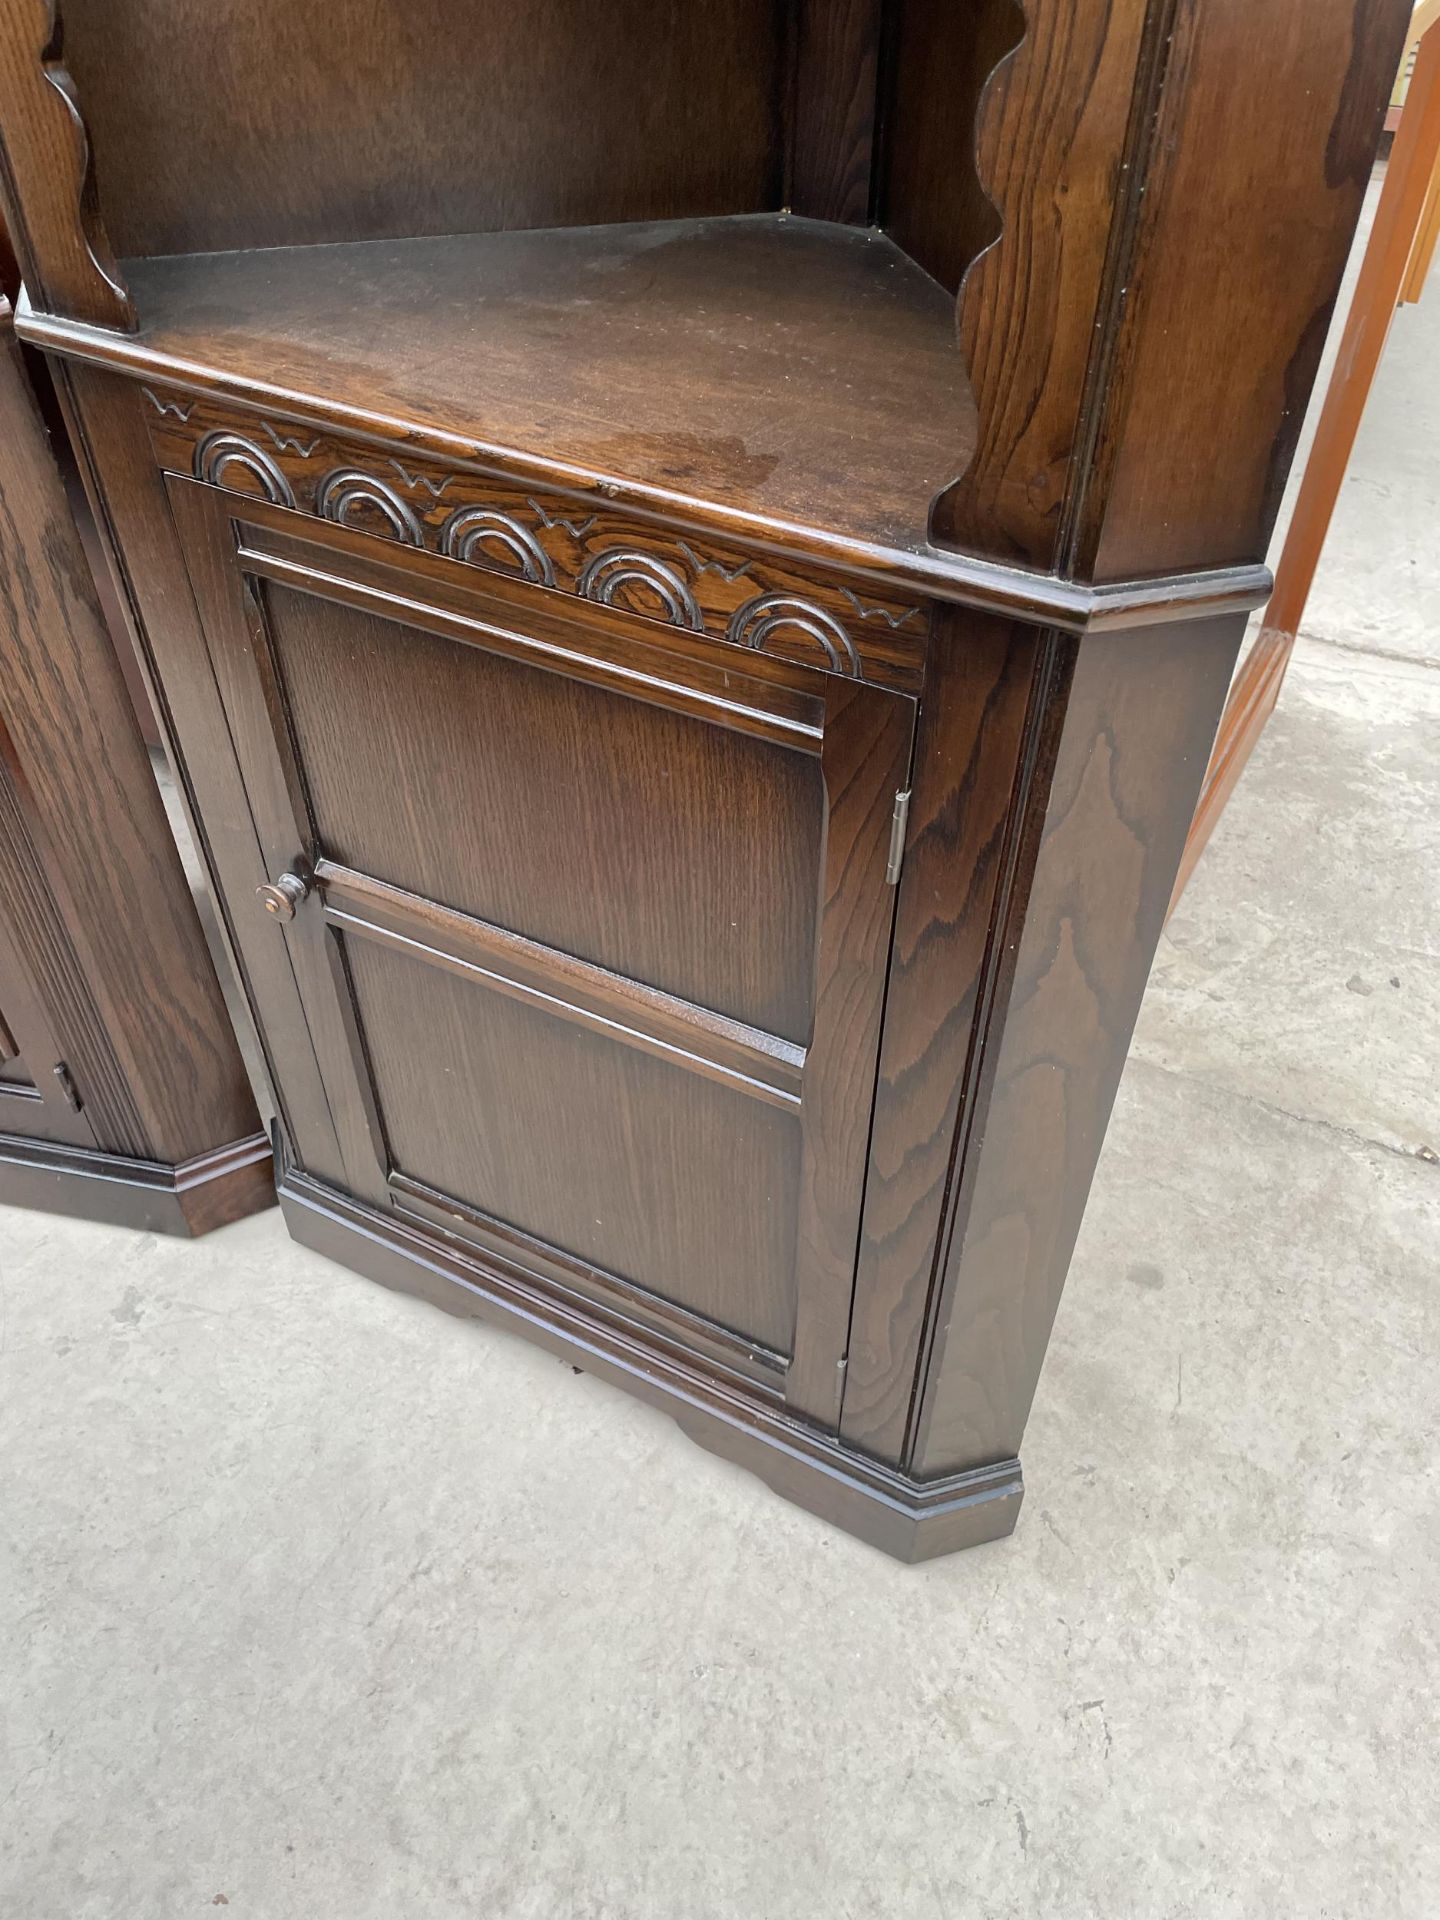 AN OAK OLD CHARM STYLE CORNER CABINET - Image 3 of 3